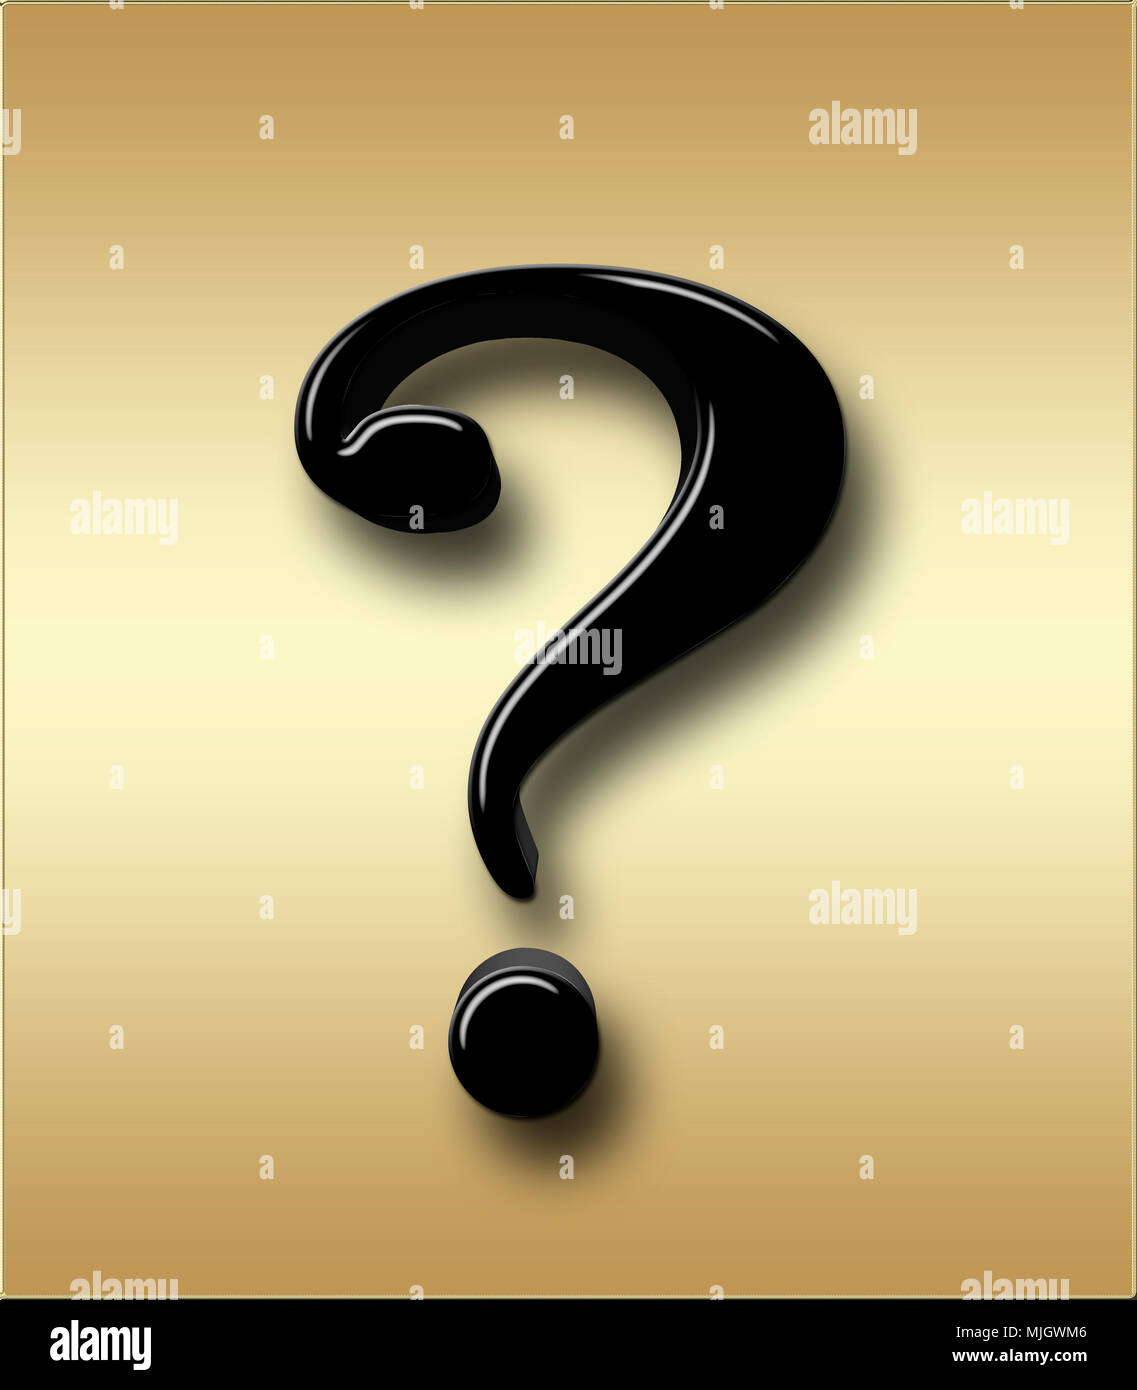 Stock Illustration - Large Three Dimensional Black Question Mark , 3D Illustration, Isolated against the Golden Background. Stock Photo